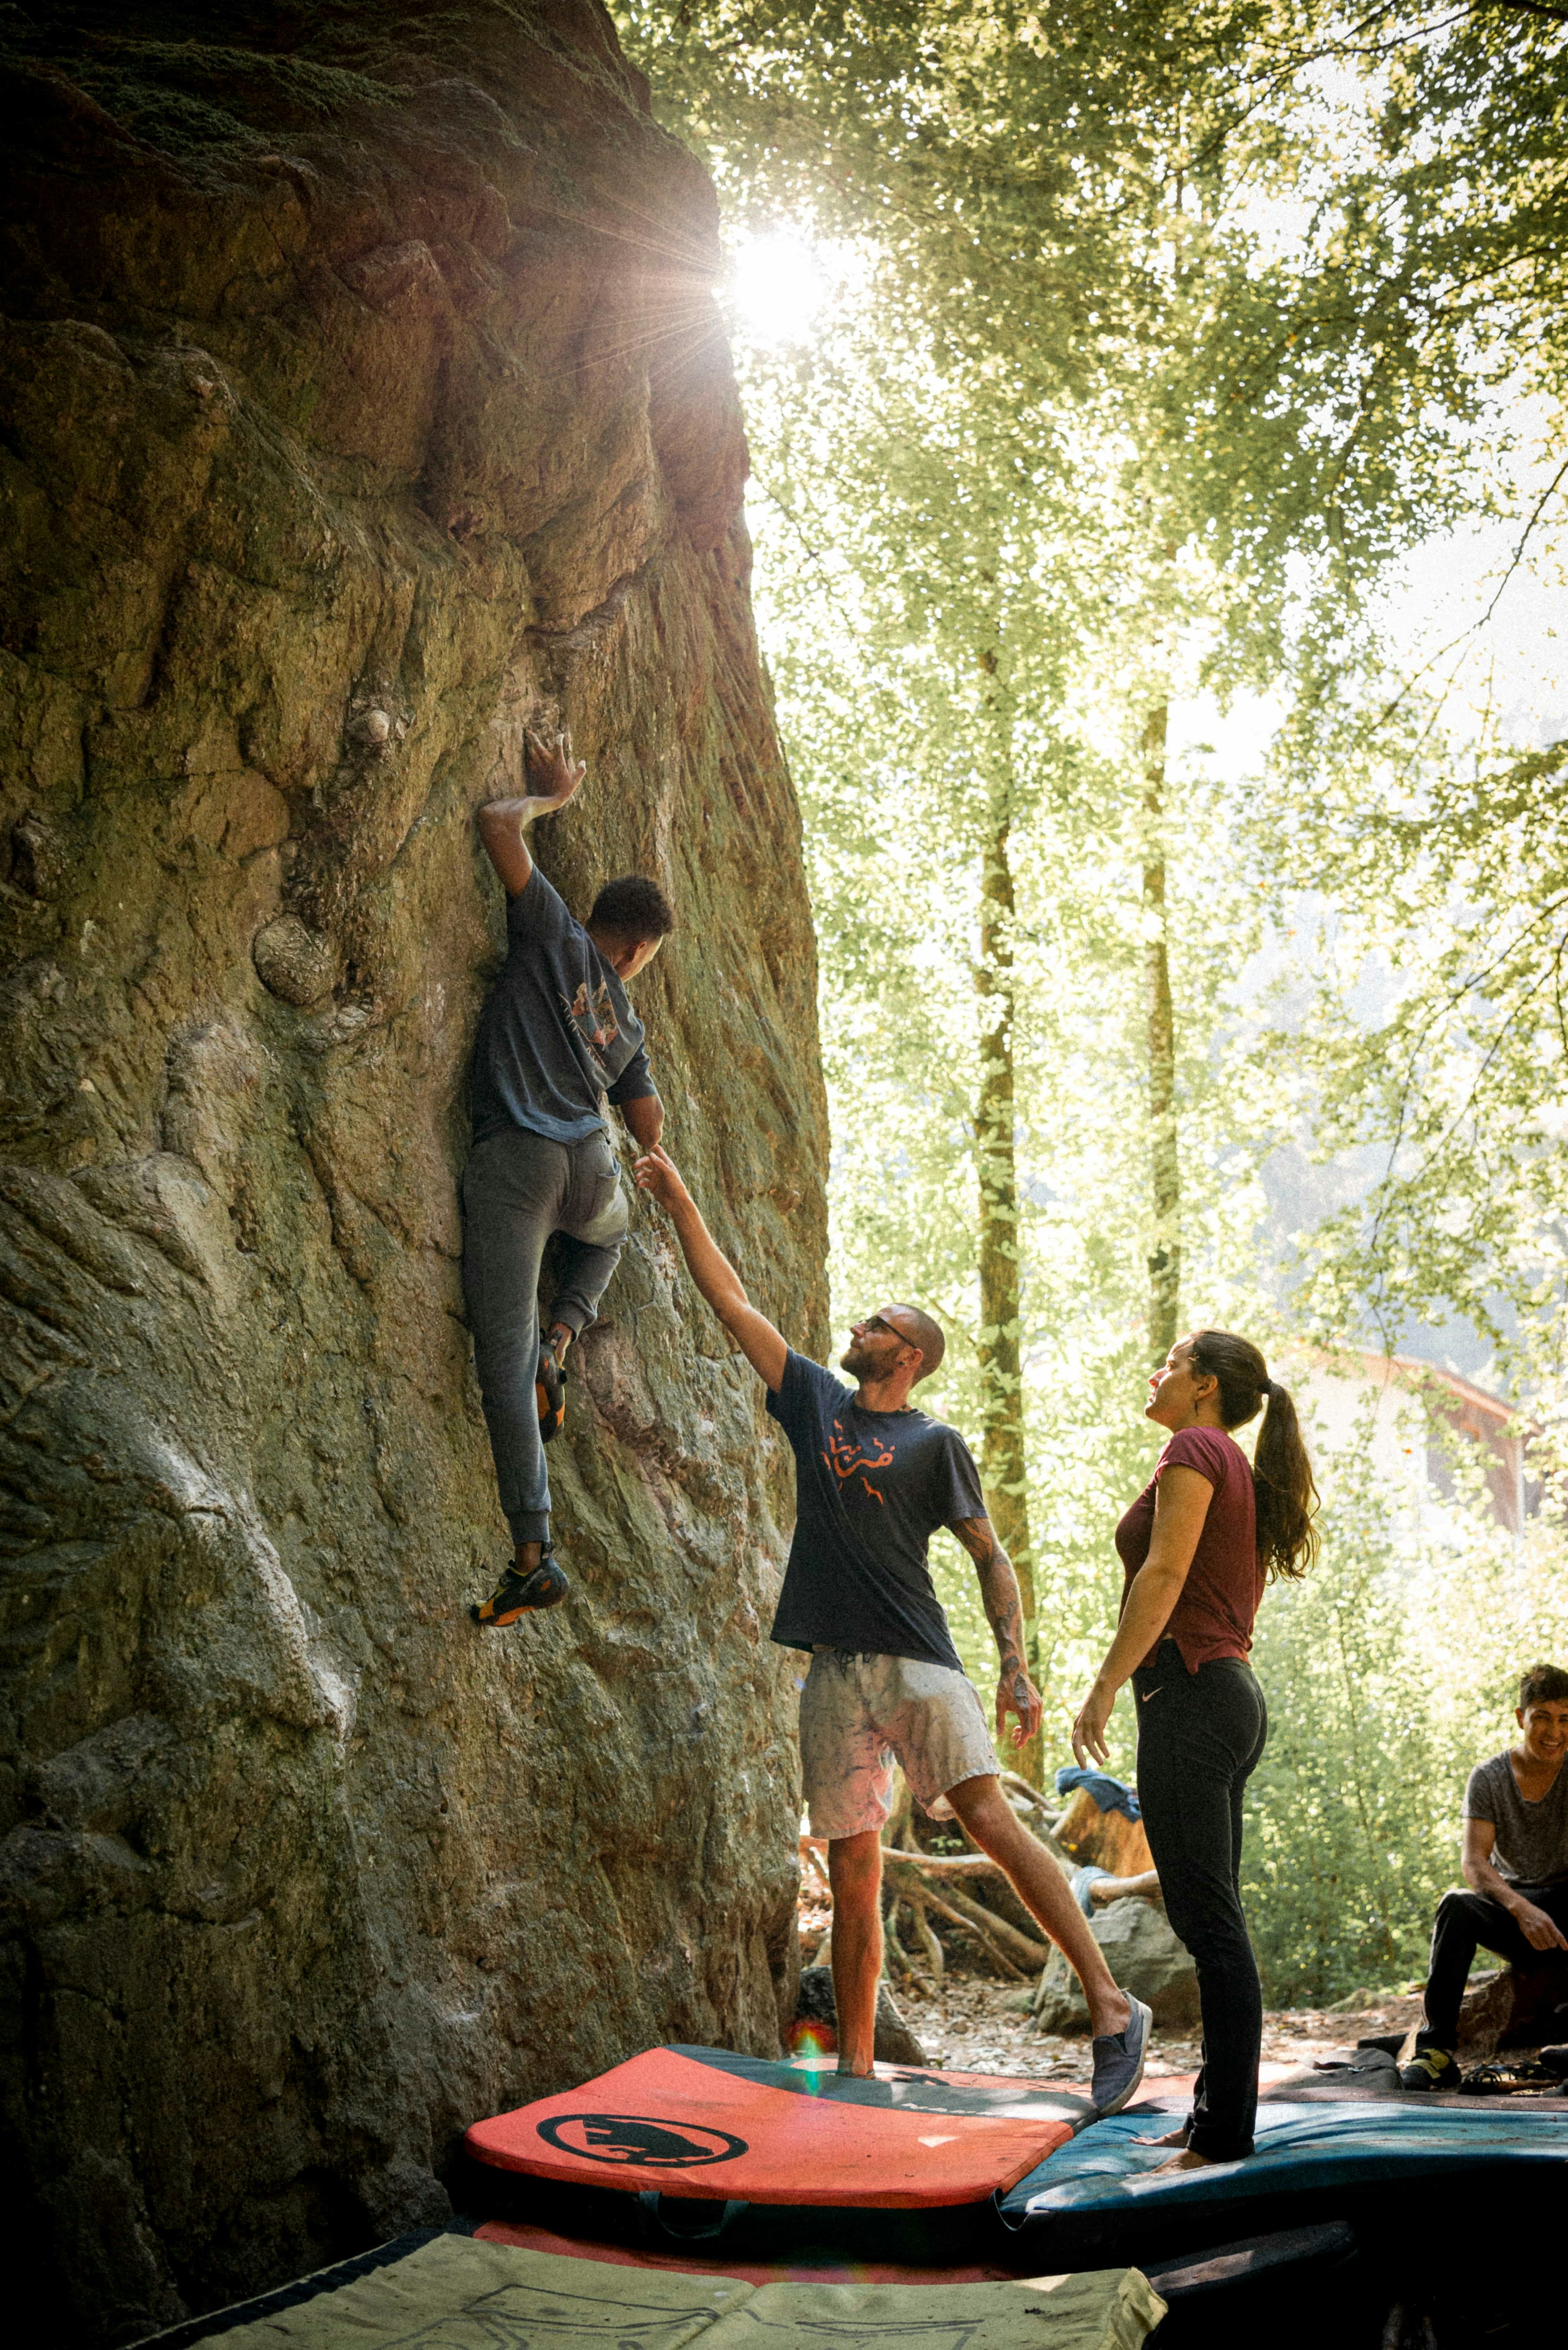 People bouldering at a rock outside in nature